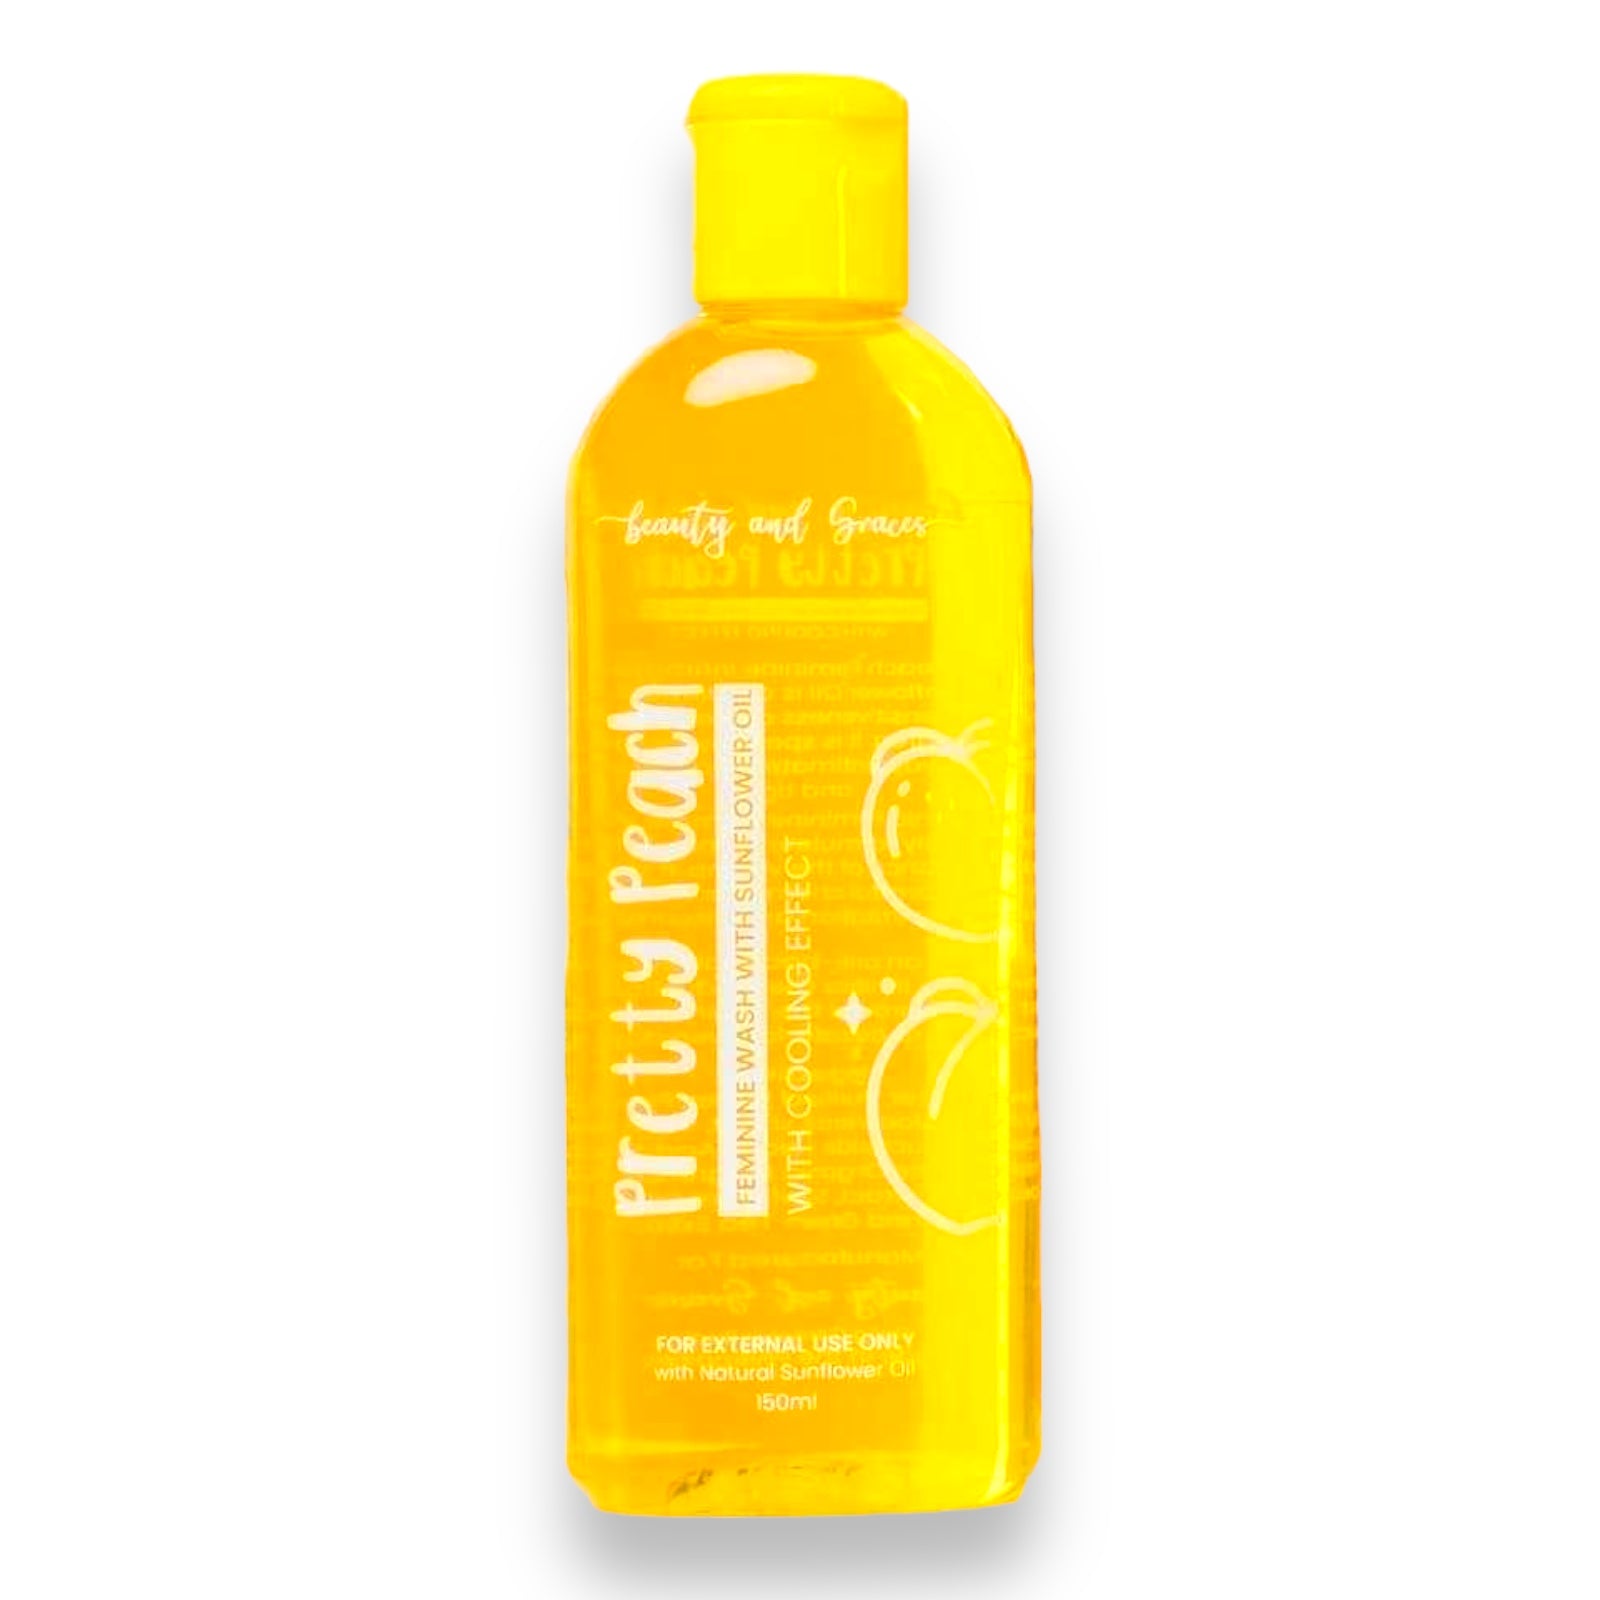 Beauty and Graces - Pretty Peach Feminine Wash with Sunflower Oil 150ML